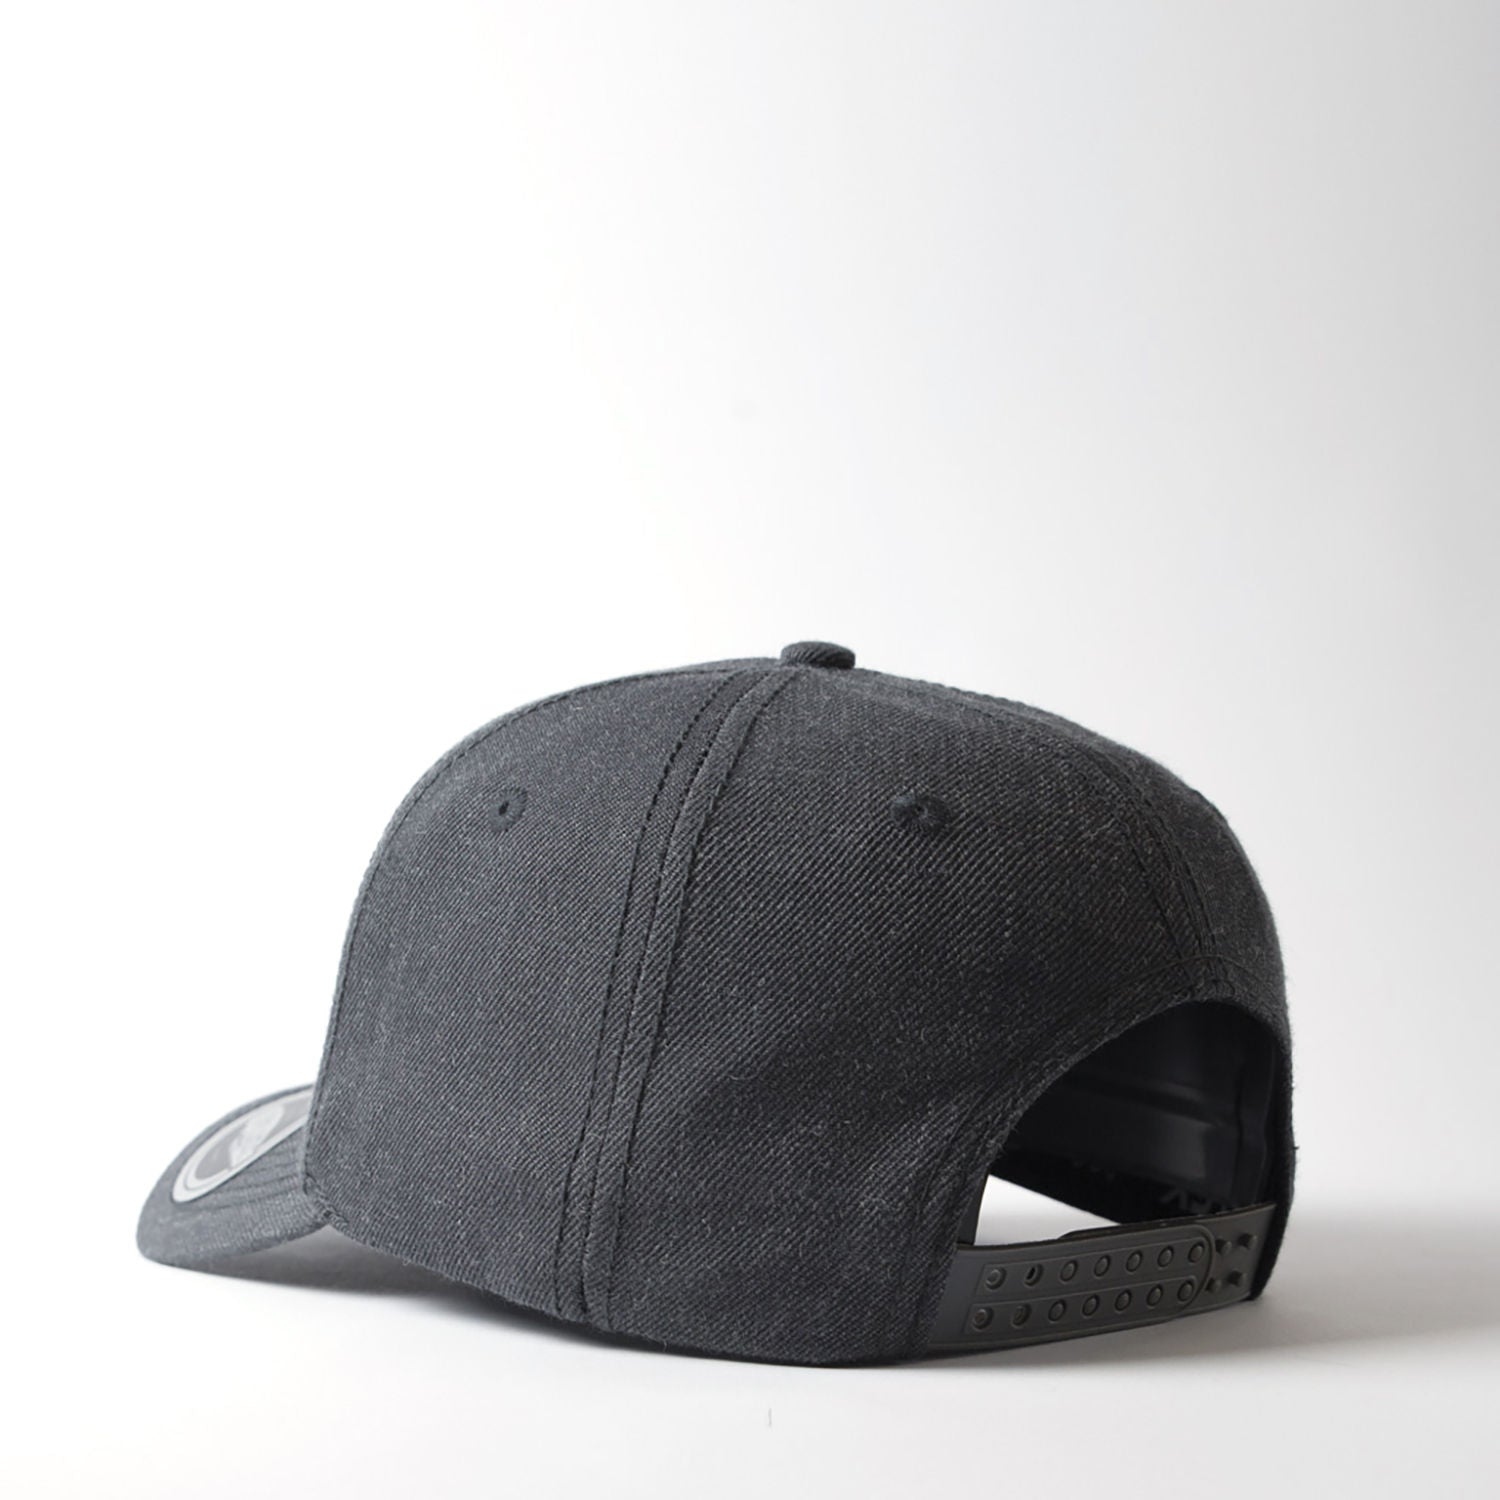 KC_3000 NU-FIT® pro style spandex fitted cap